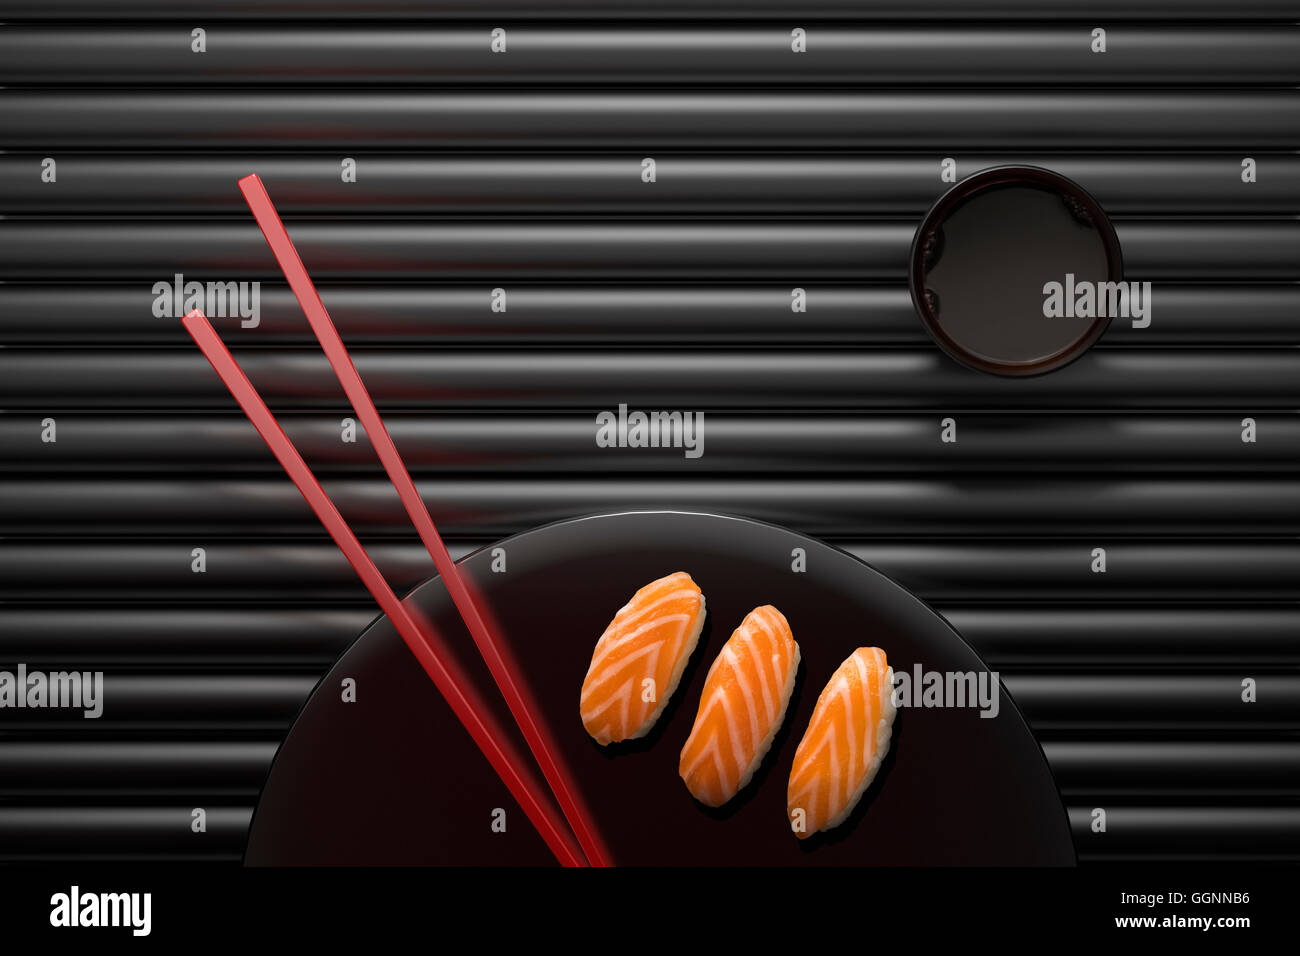 Chopsticks and sushi on round plate with dipping sauce Stock Photo